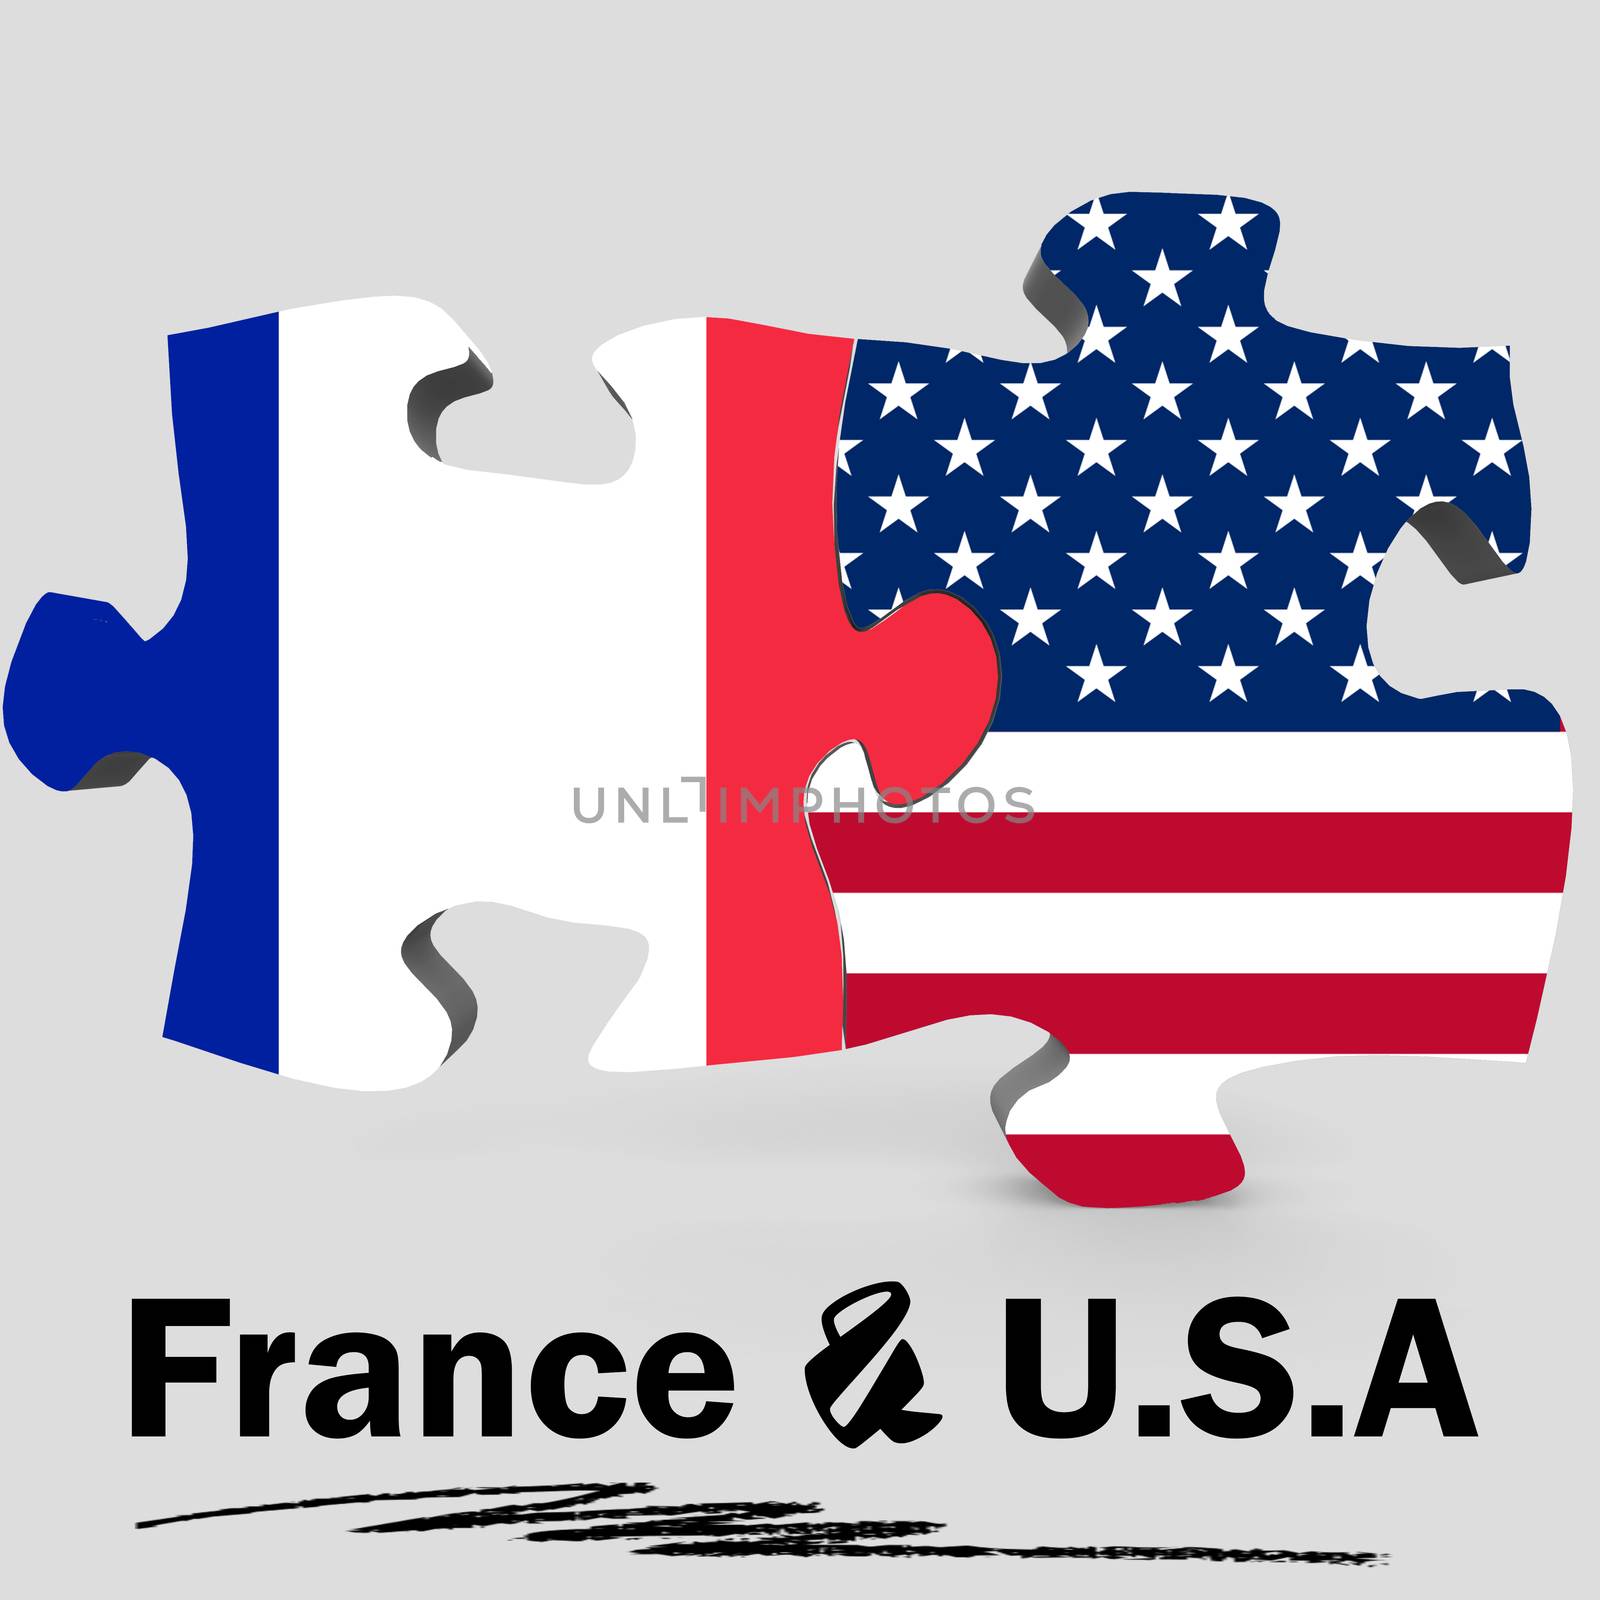 USA and France flags in puzzle by tang90246